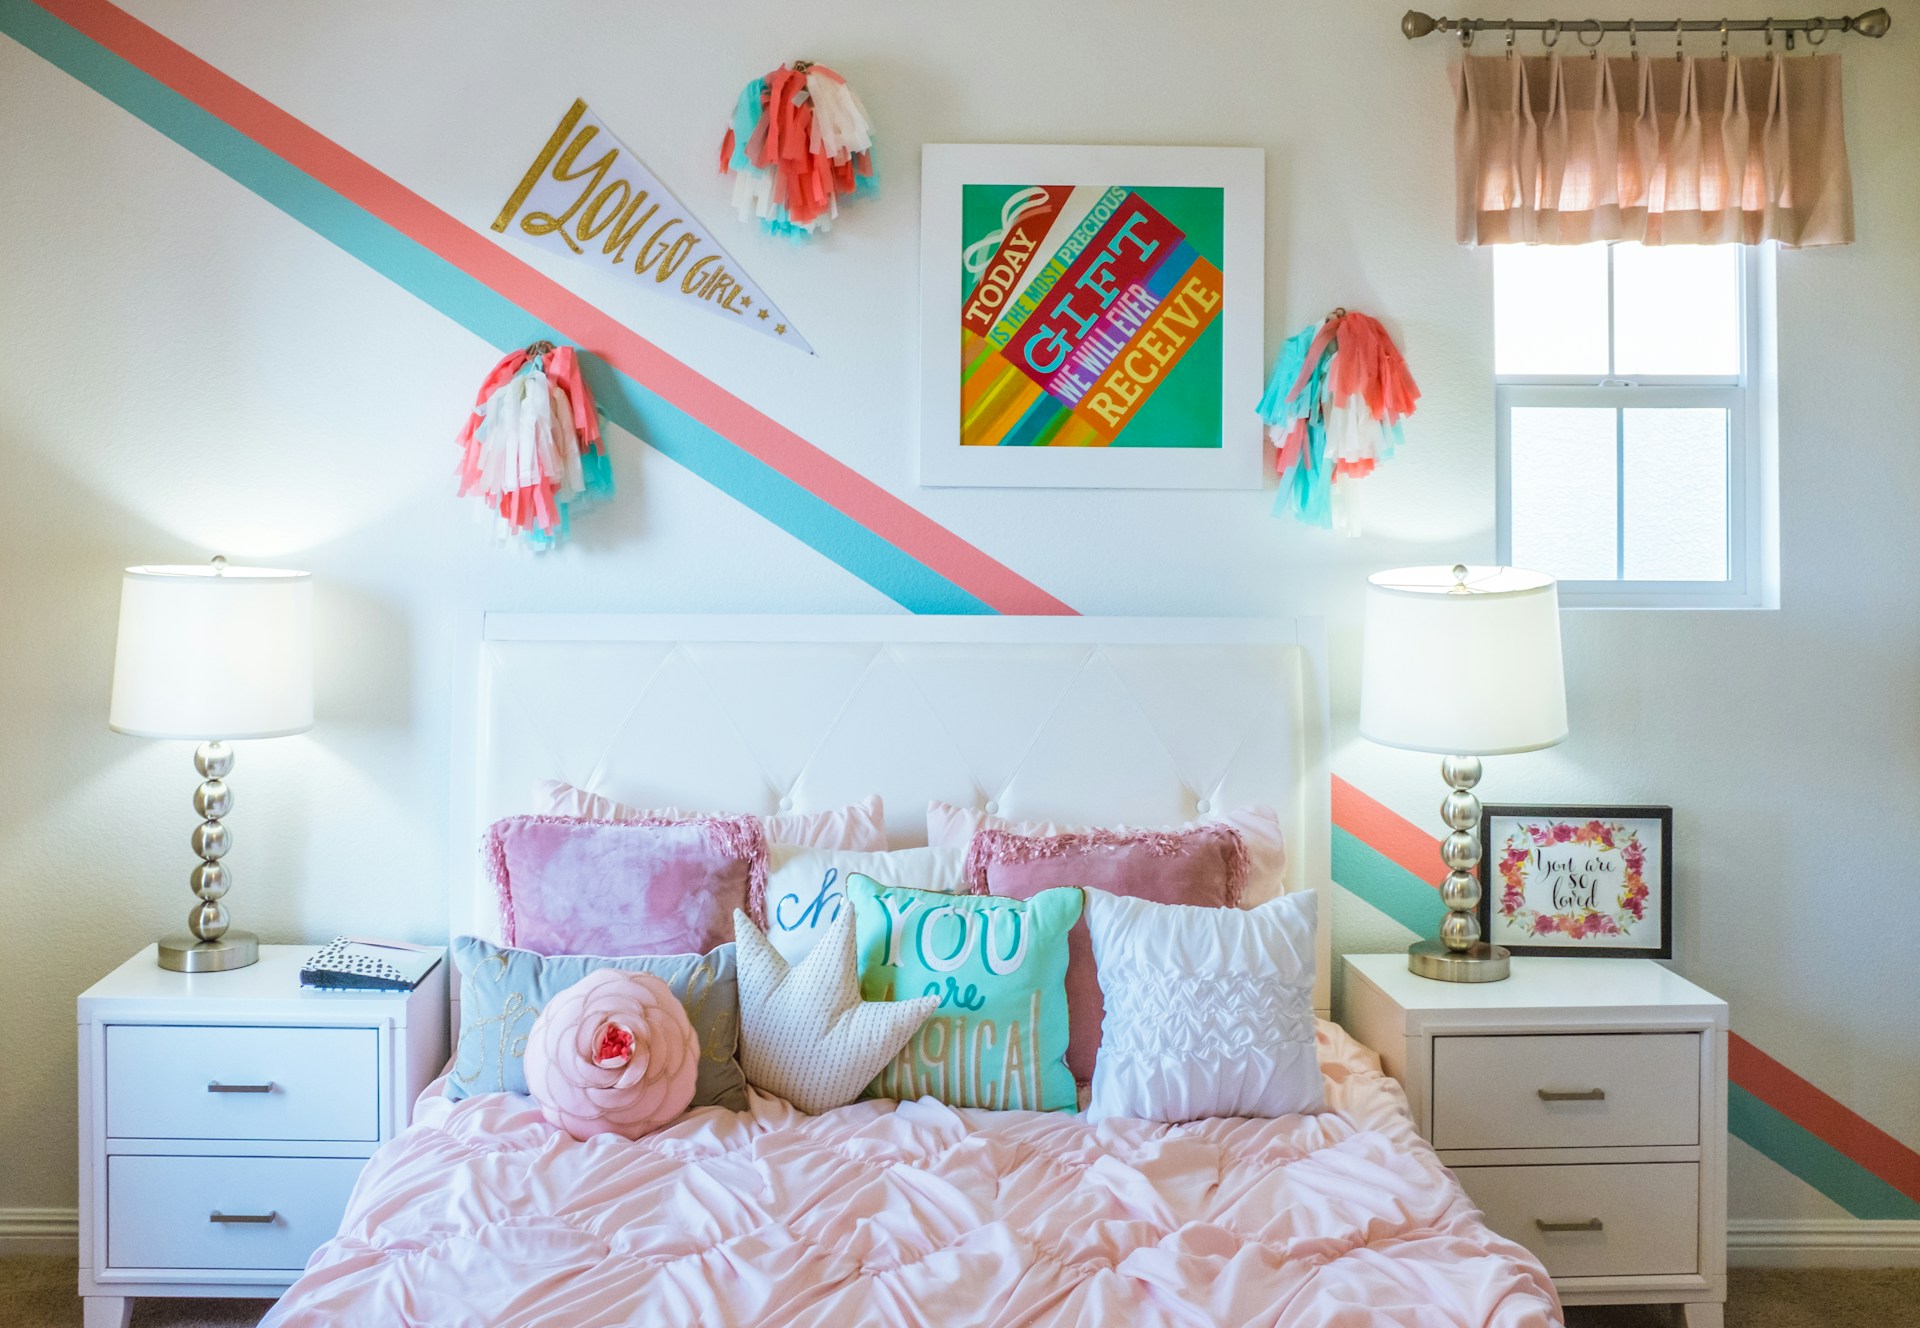 6 Tips for Painting a Sports-Themed Bedroom